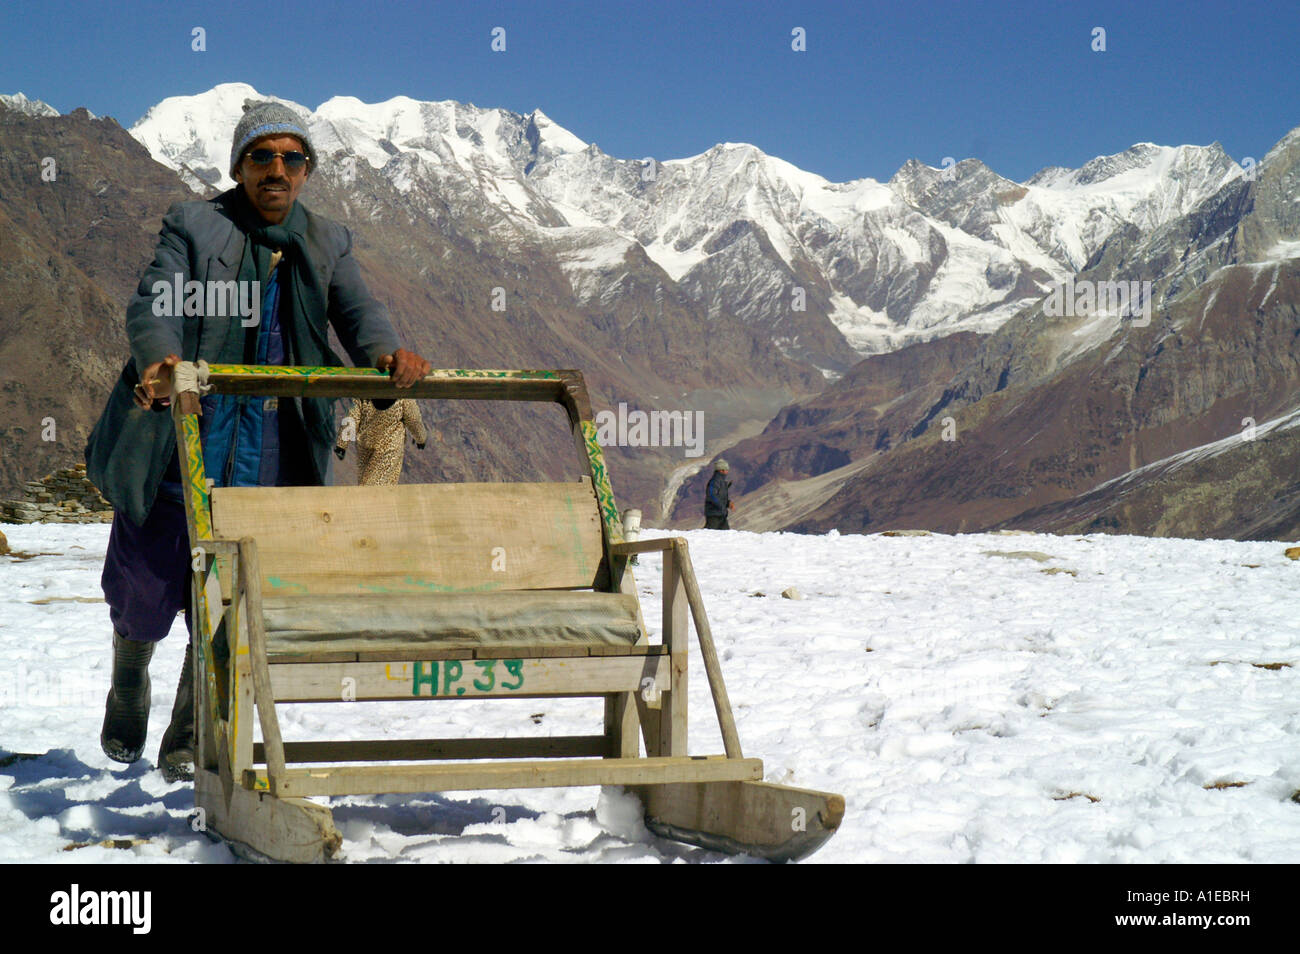 Indian man pushing empty wooden sleigh on snow in Indian Himalaya, Rohtang Pass in Lahaul region Stock Photo